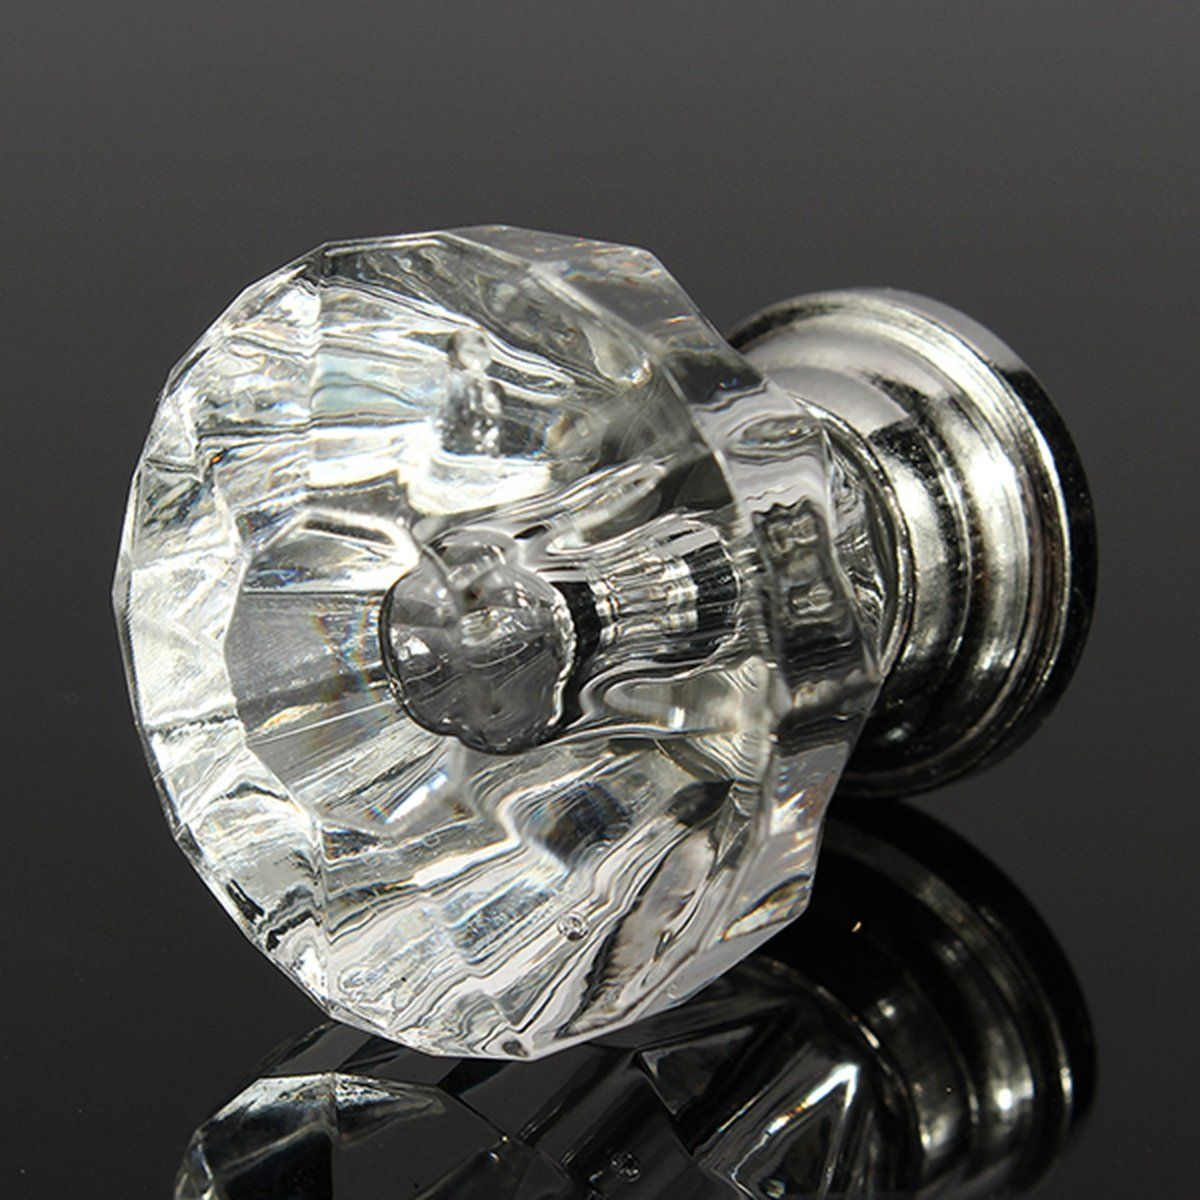 Kingso 12 Pcs Acrylic Crystal Glass Door Knobs Drawer Cabinet Pull pertaining to size 1200 X 1200